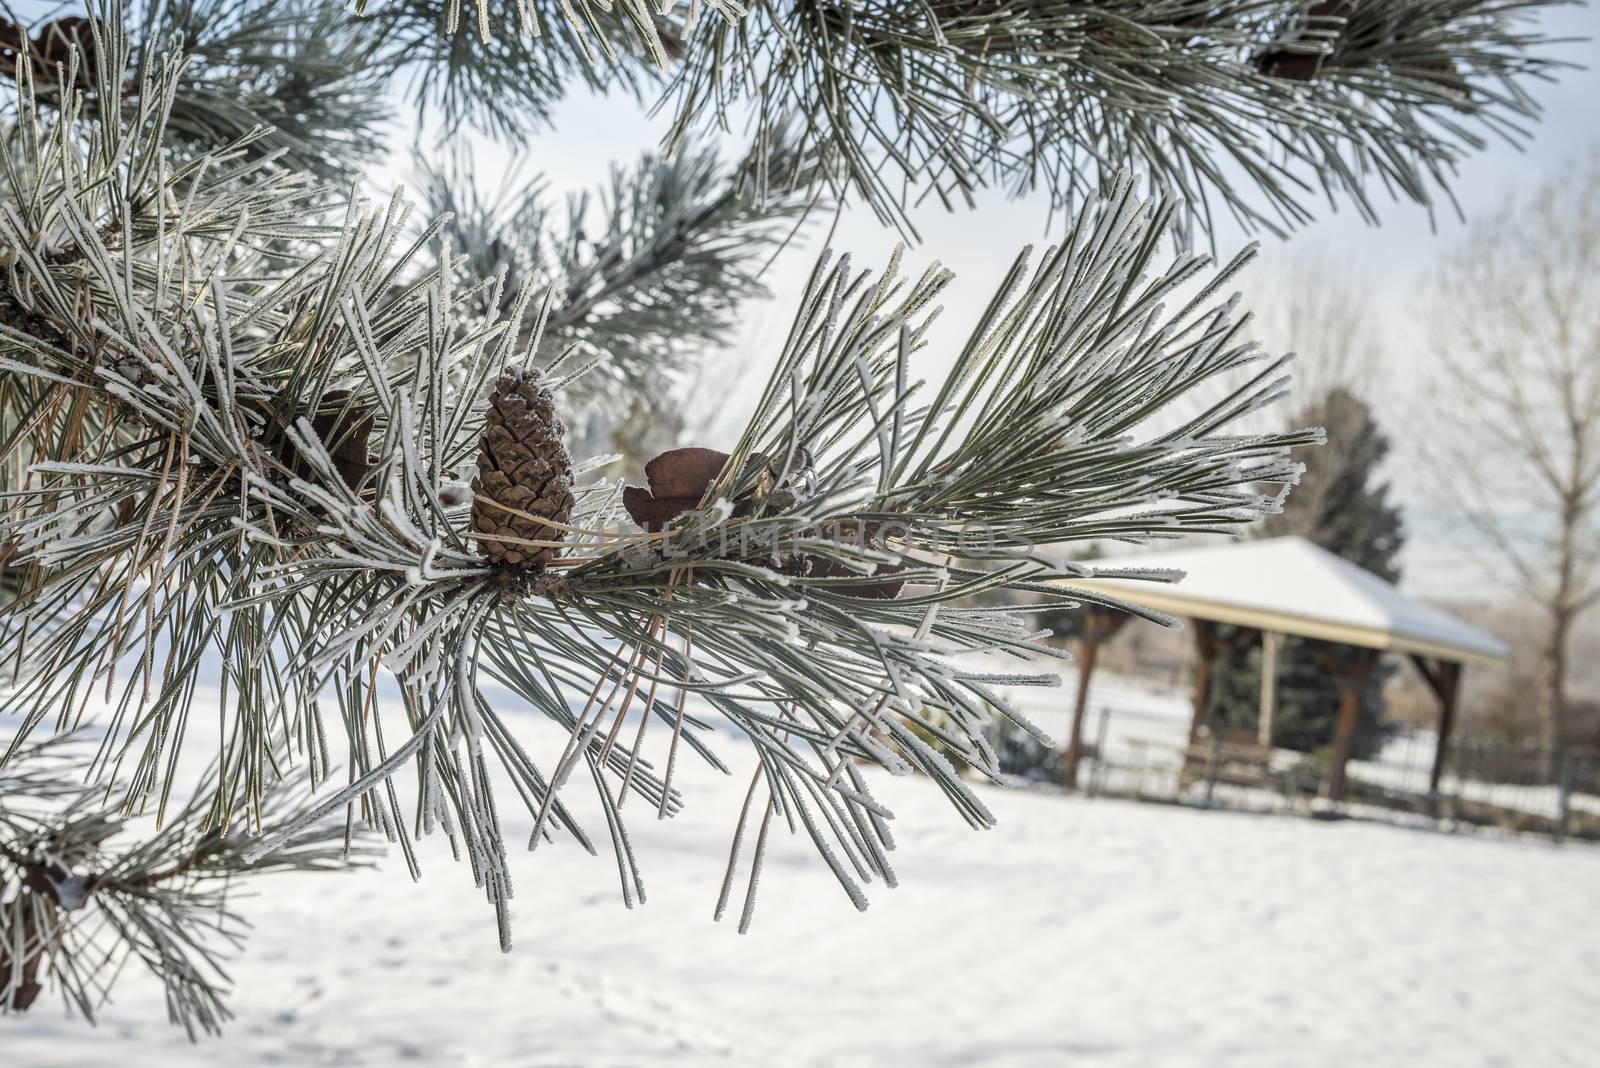 Frost-covered pine tree in a park with a gazebo in winter by Njean